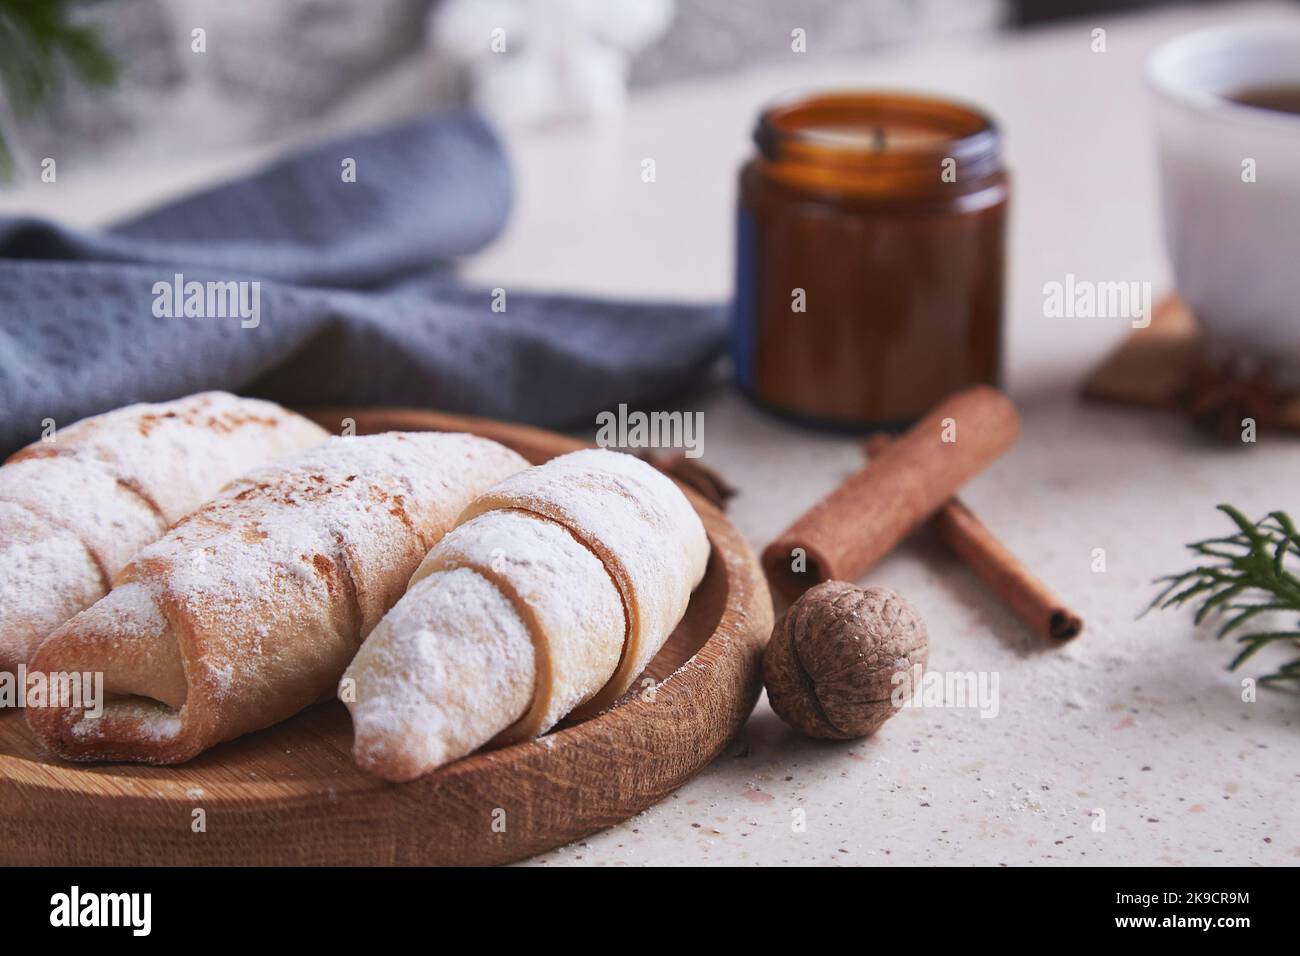 Classic aesthetic Christmas crescent handmade bagels with cinnamon sticks and walnuts. Cozy home. Stock Photo